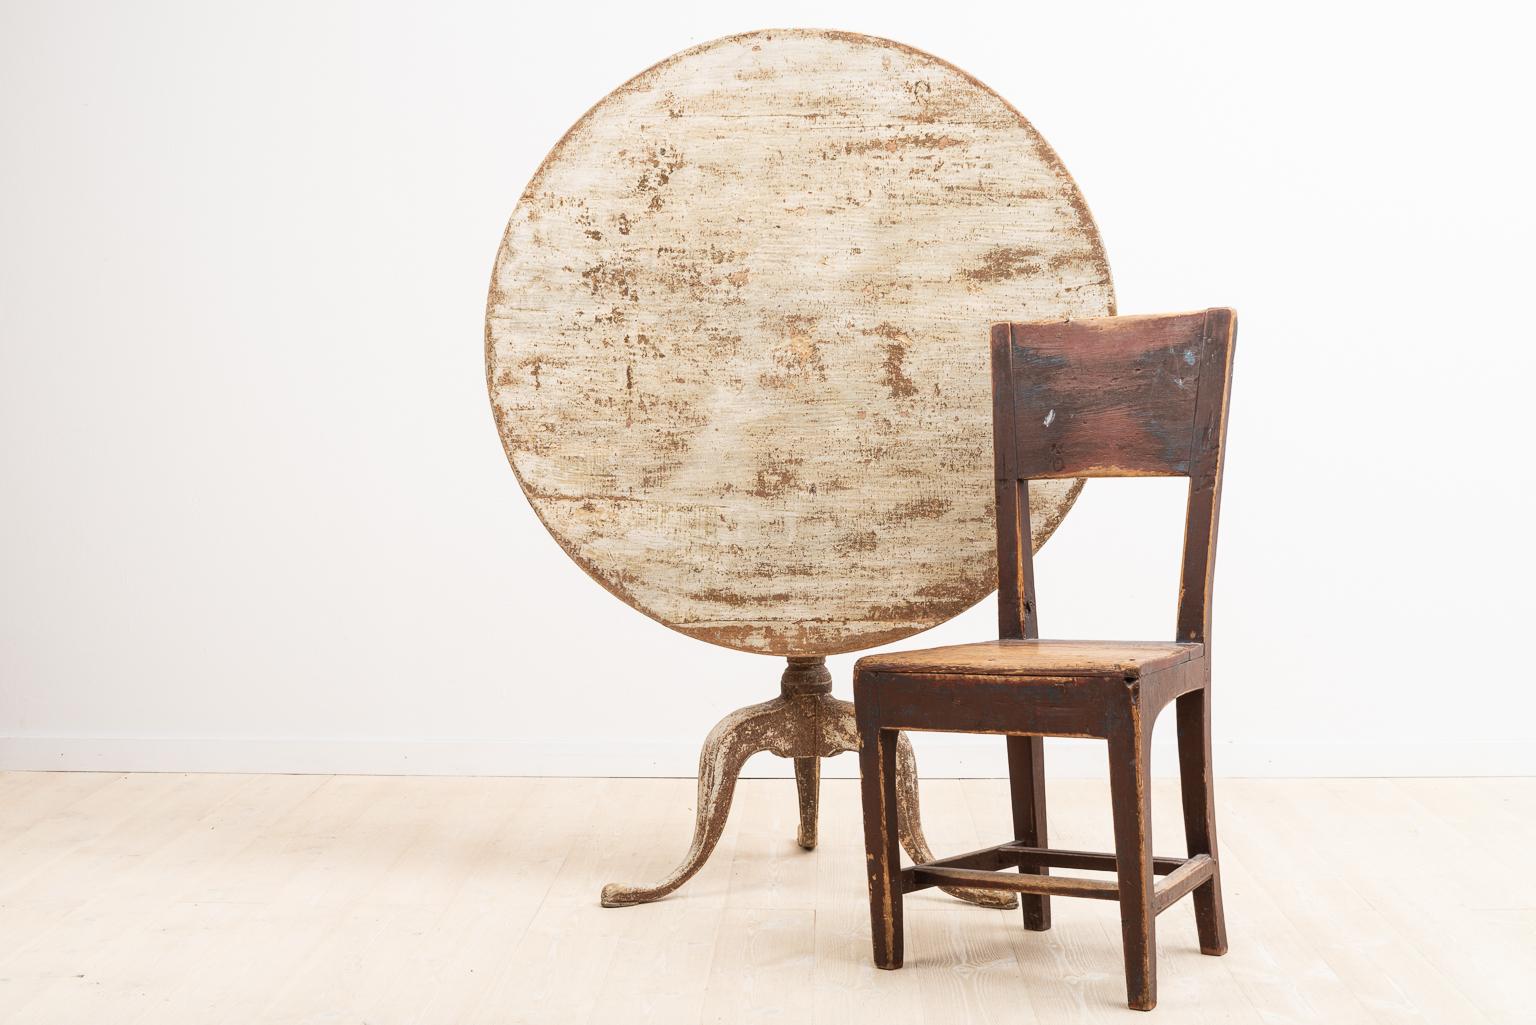 Hand-Painted Swedish Gustavian Tilt-Top Table from the 1780s